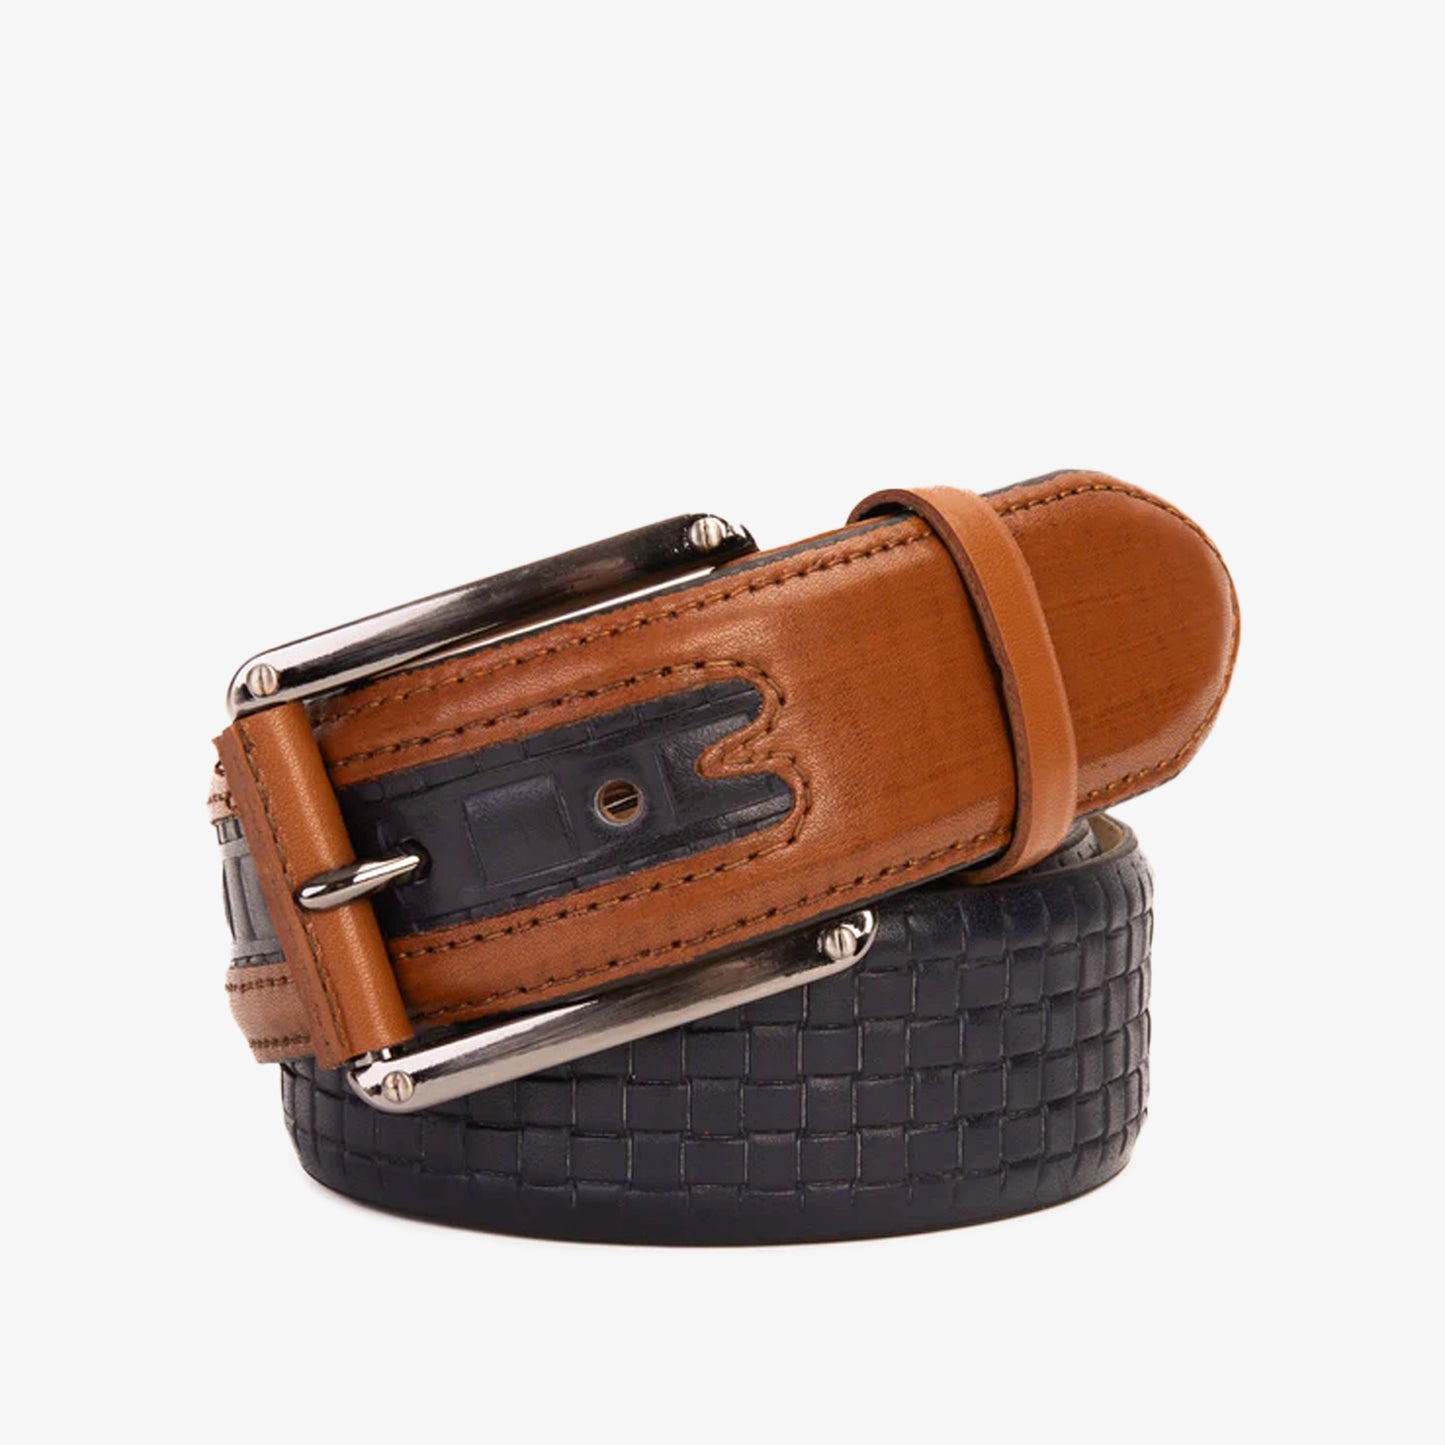 The Istanbul Tan Leather Belt – Vinci Leather Shoes